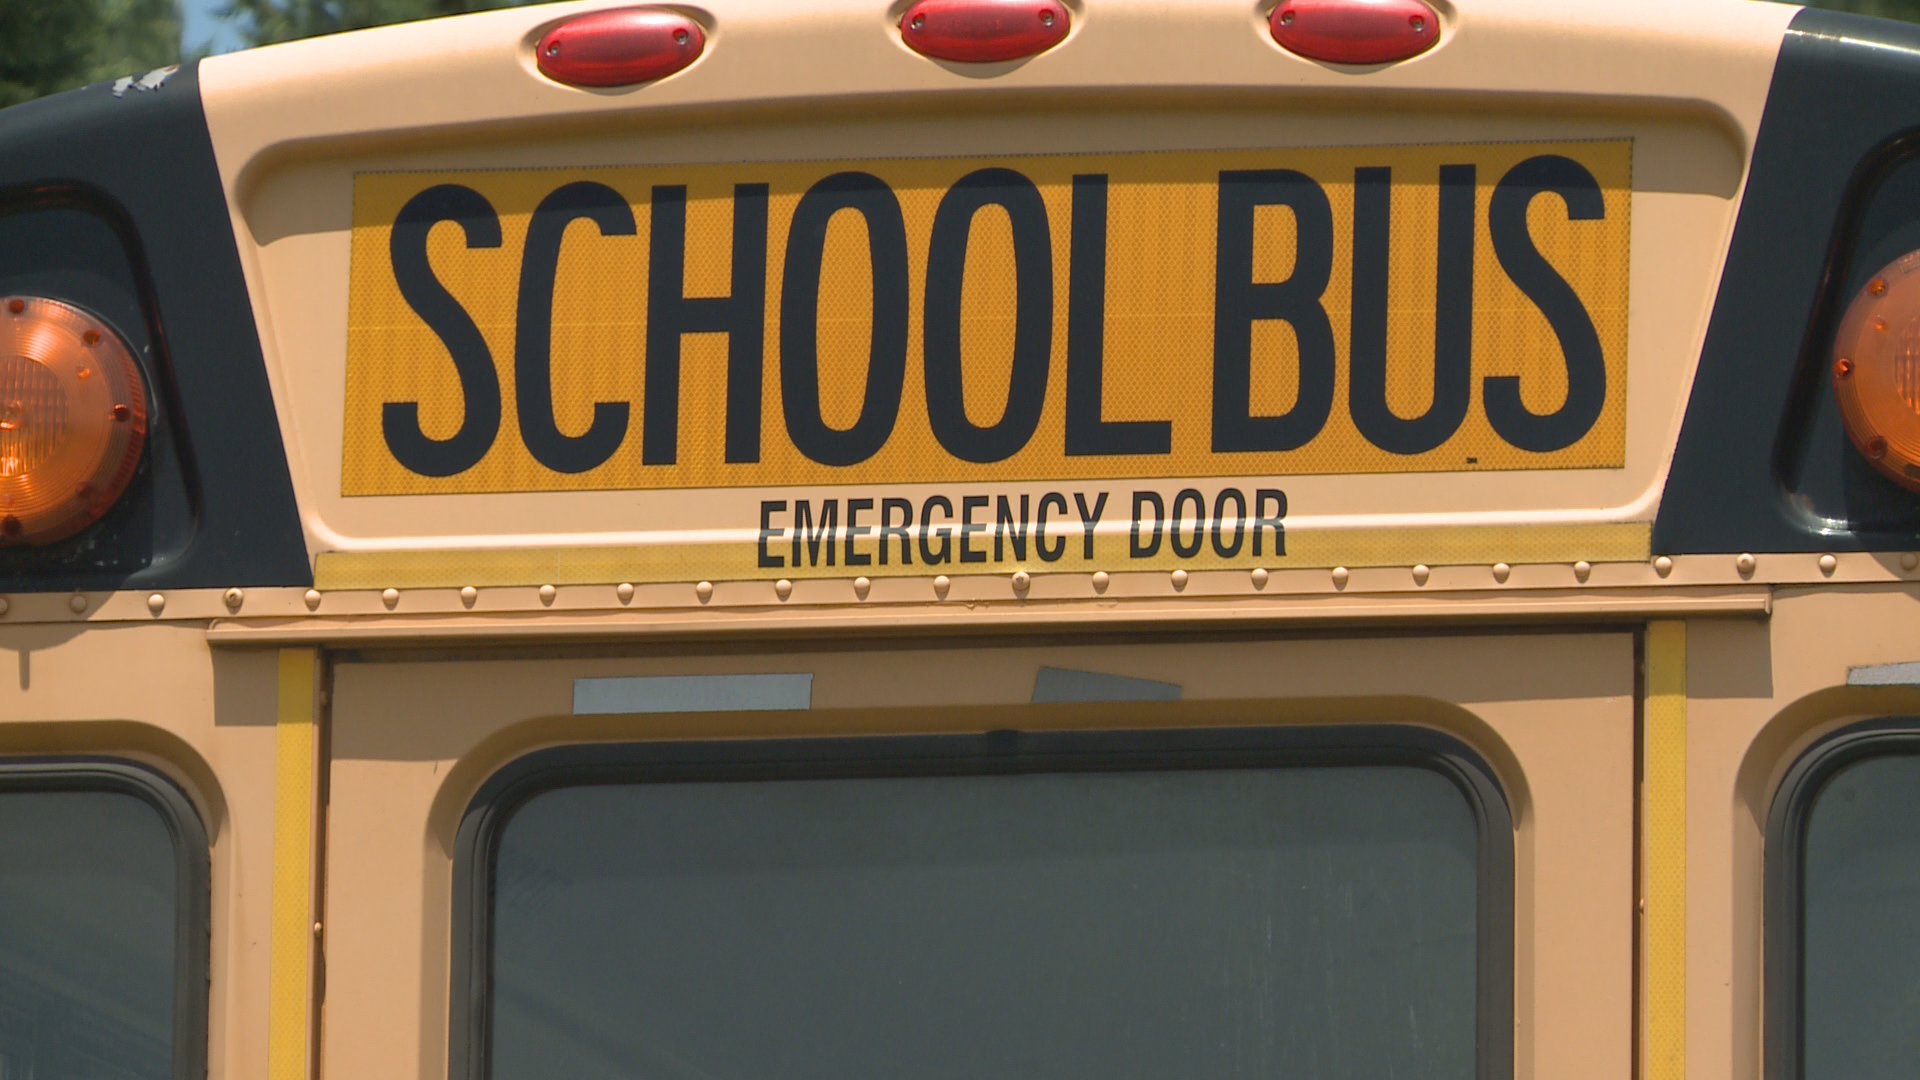 Knox County Schools is closing early on Jan. 9, thanks to heavy rain and high winds in the area.